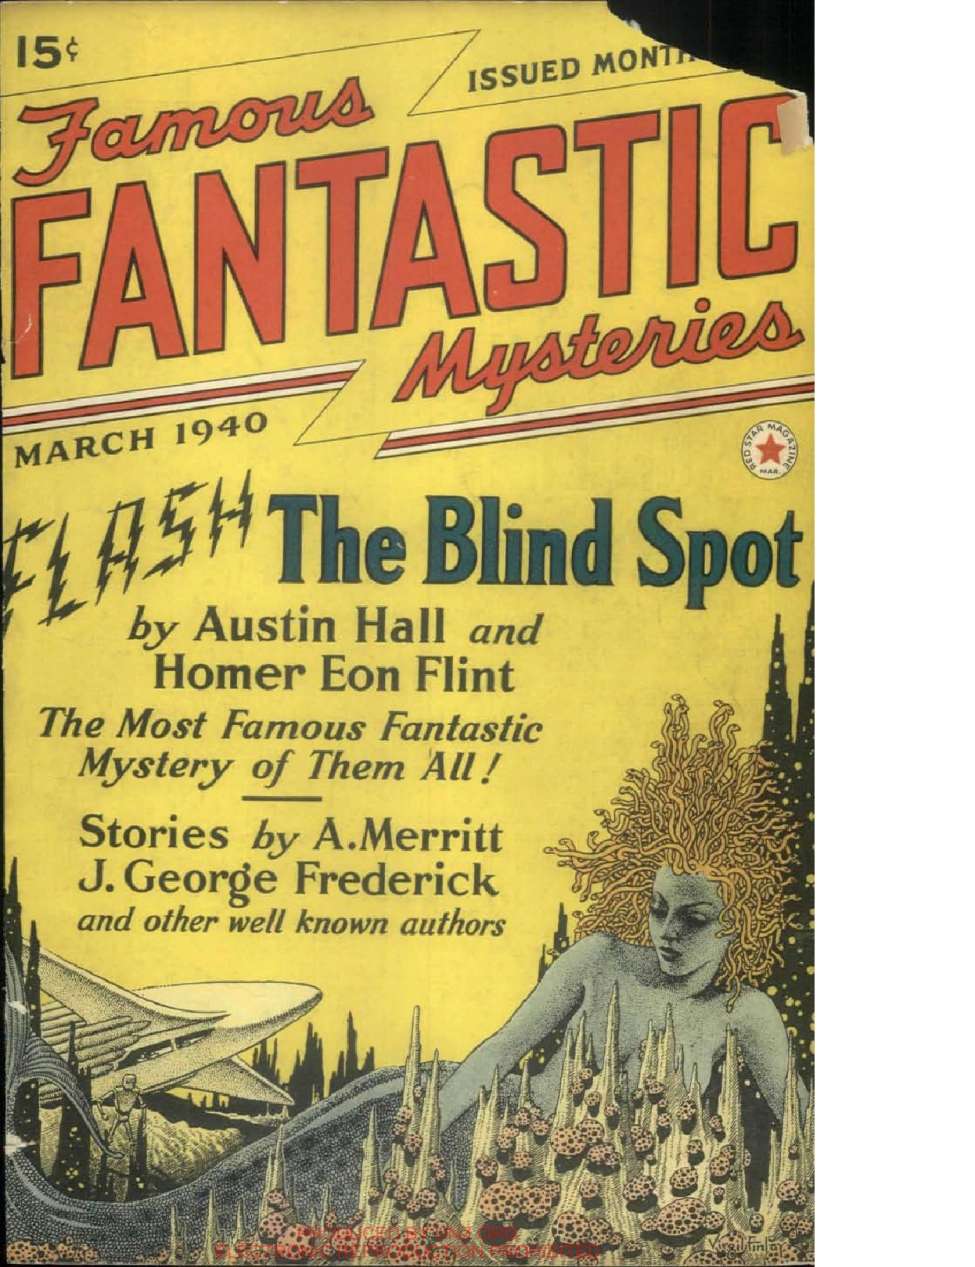 Book Cover For Famous Fantastic Mysteries v1 6 - The Blind Spot - Austin Hall